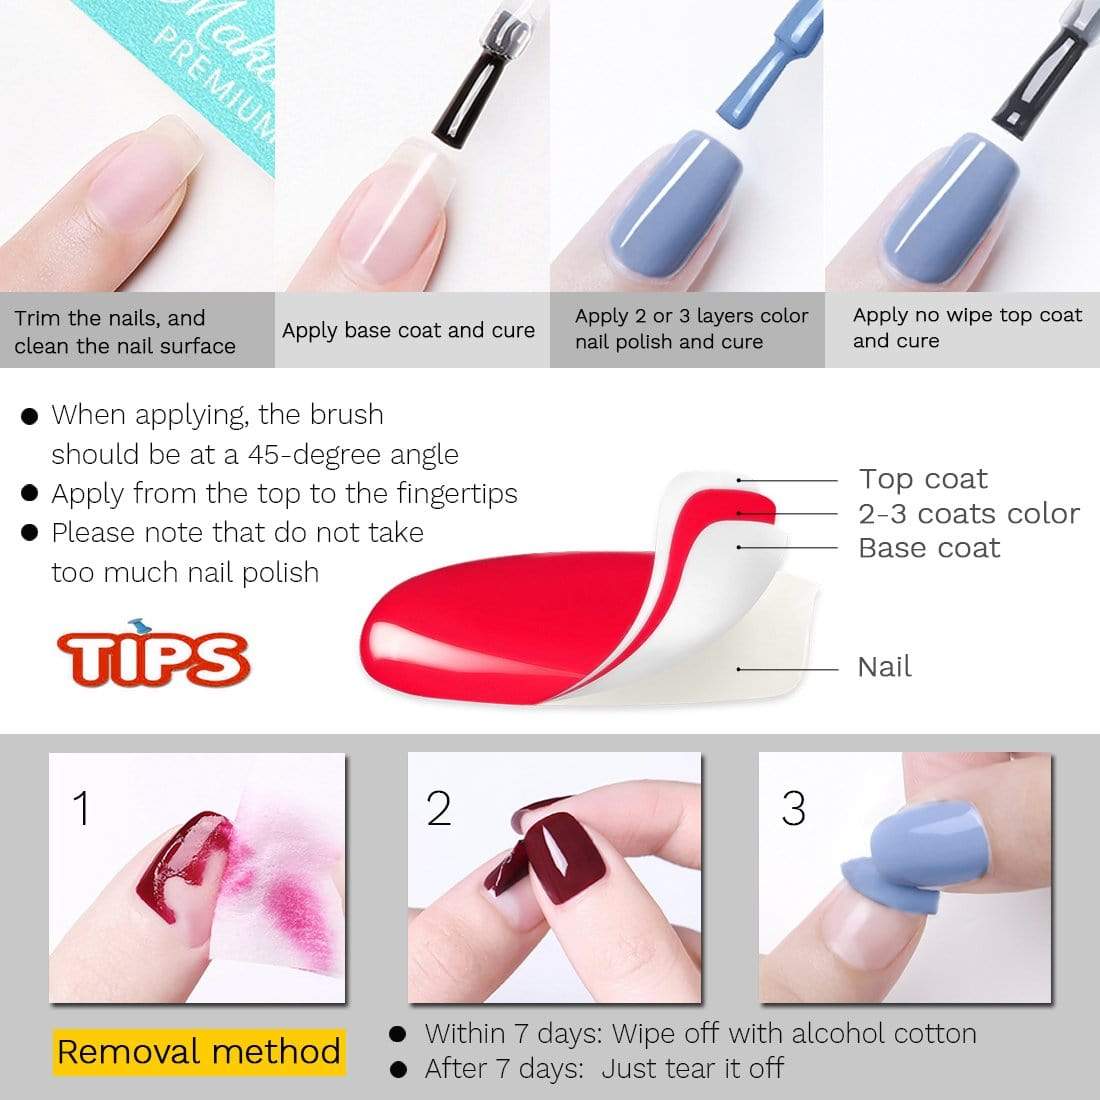 No-Wipe Top & Base Coat Set - AwsmColor by Makartt